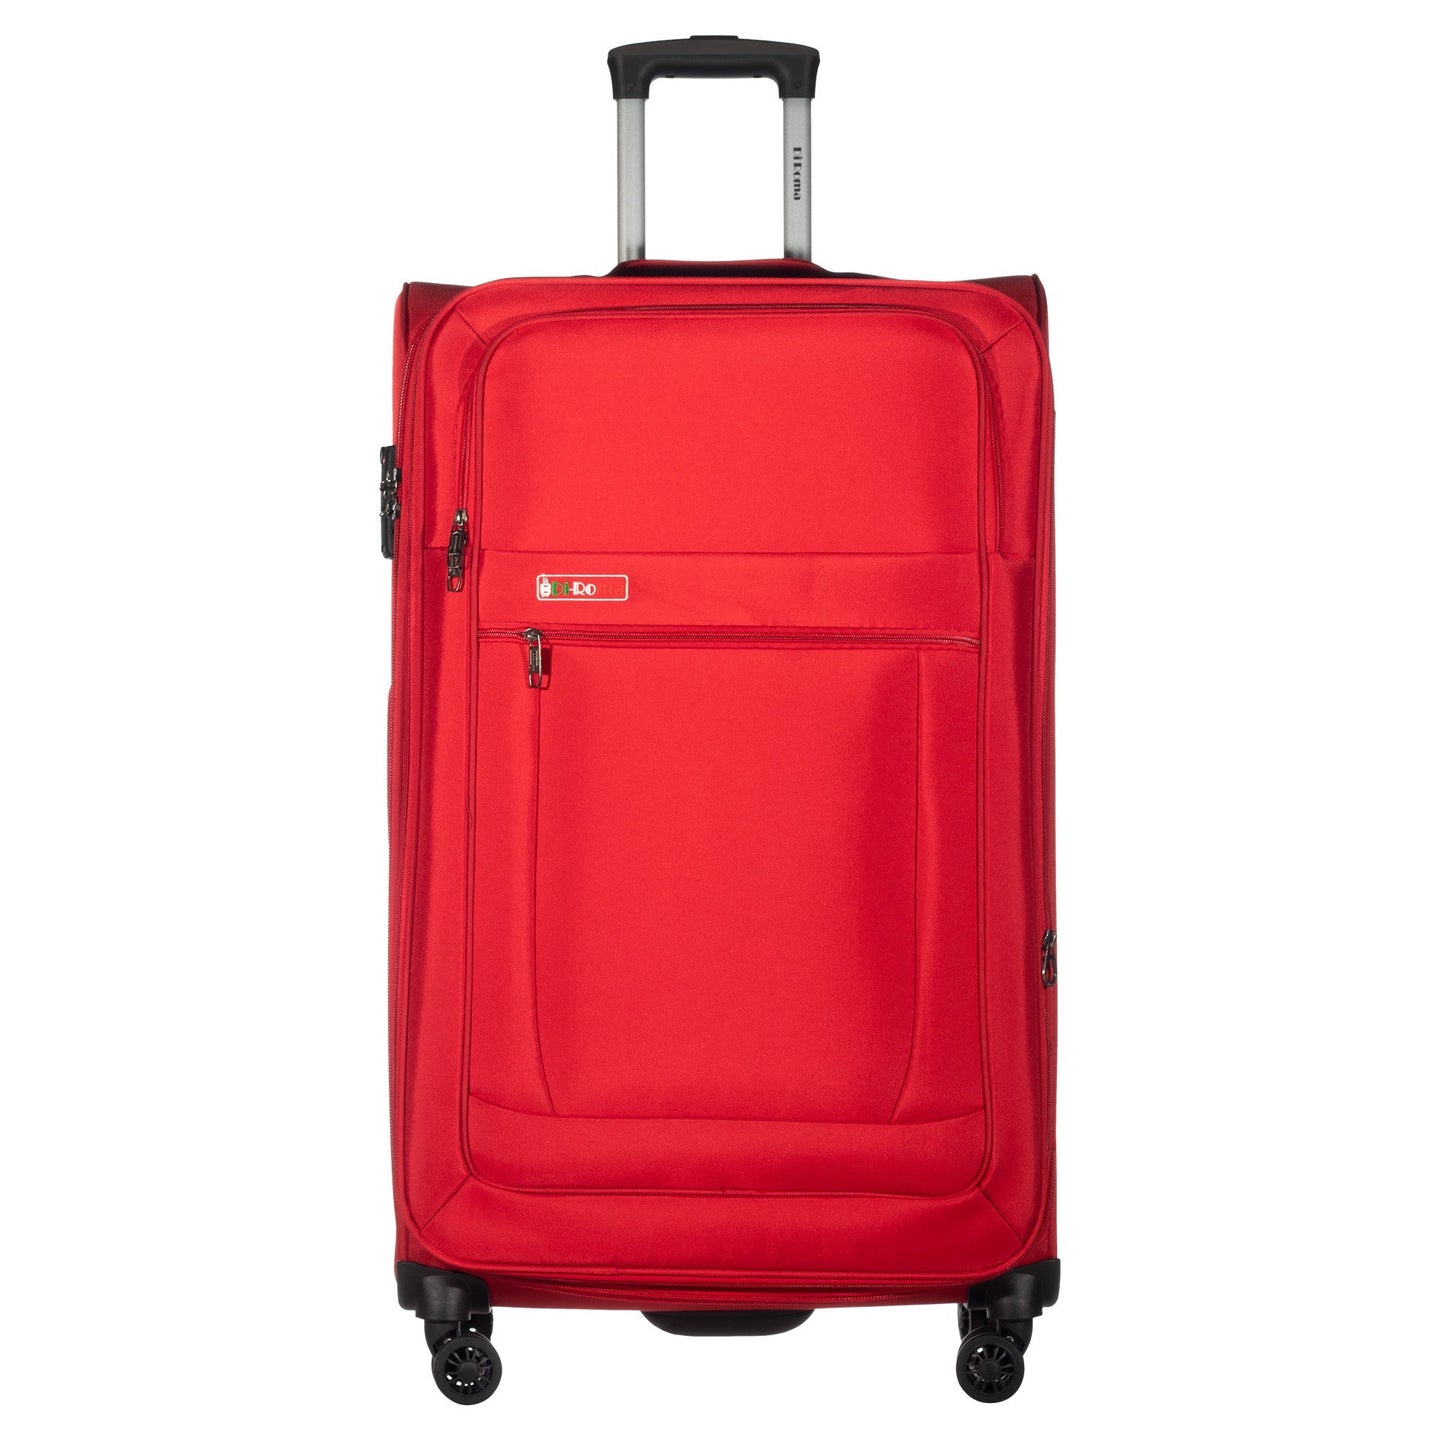 Luca Collection Red luggage Set 3pc(20/26/30") Suitcase